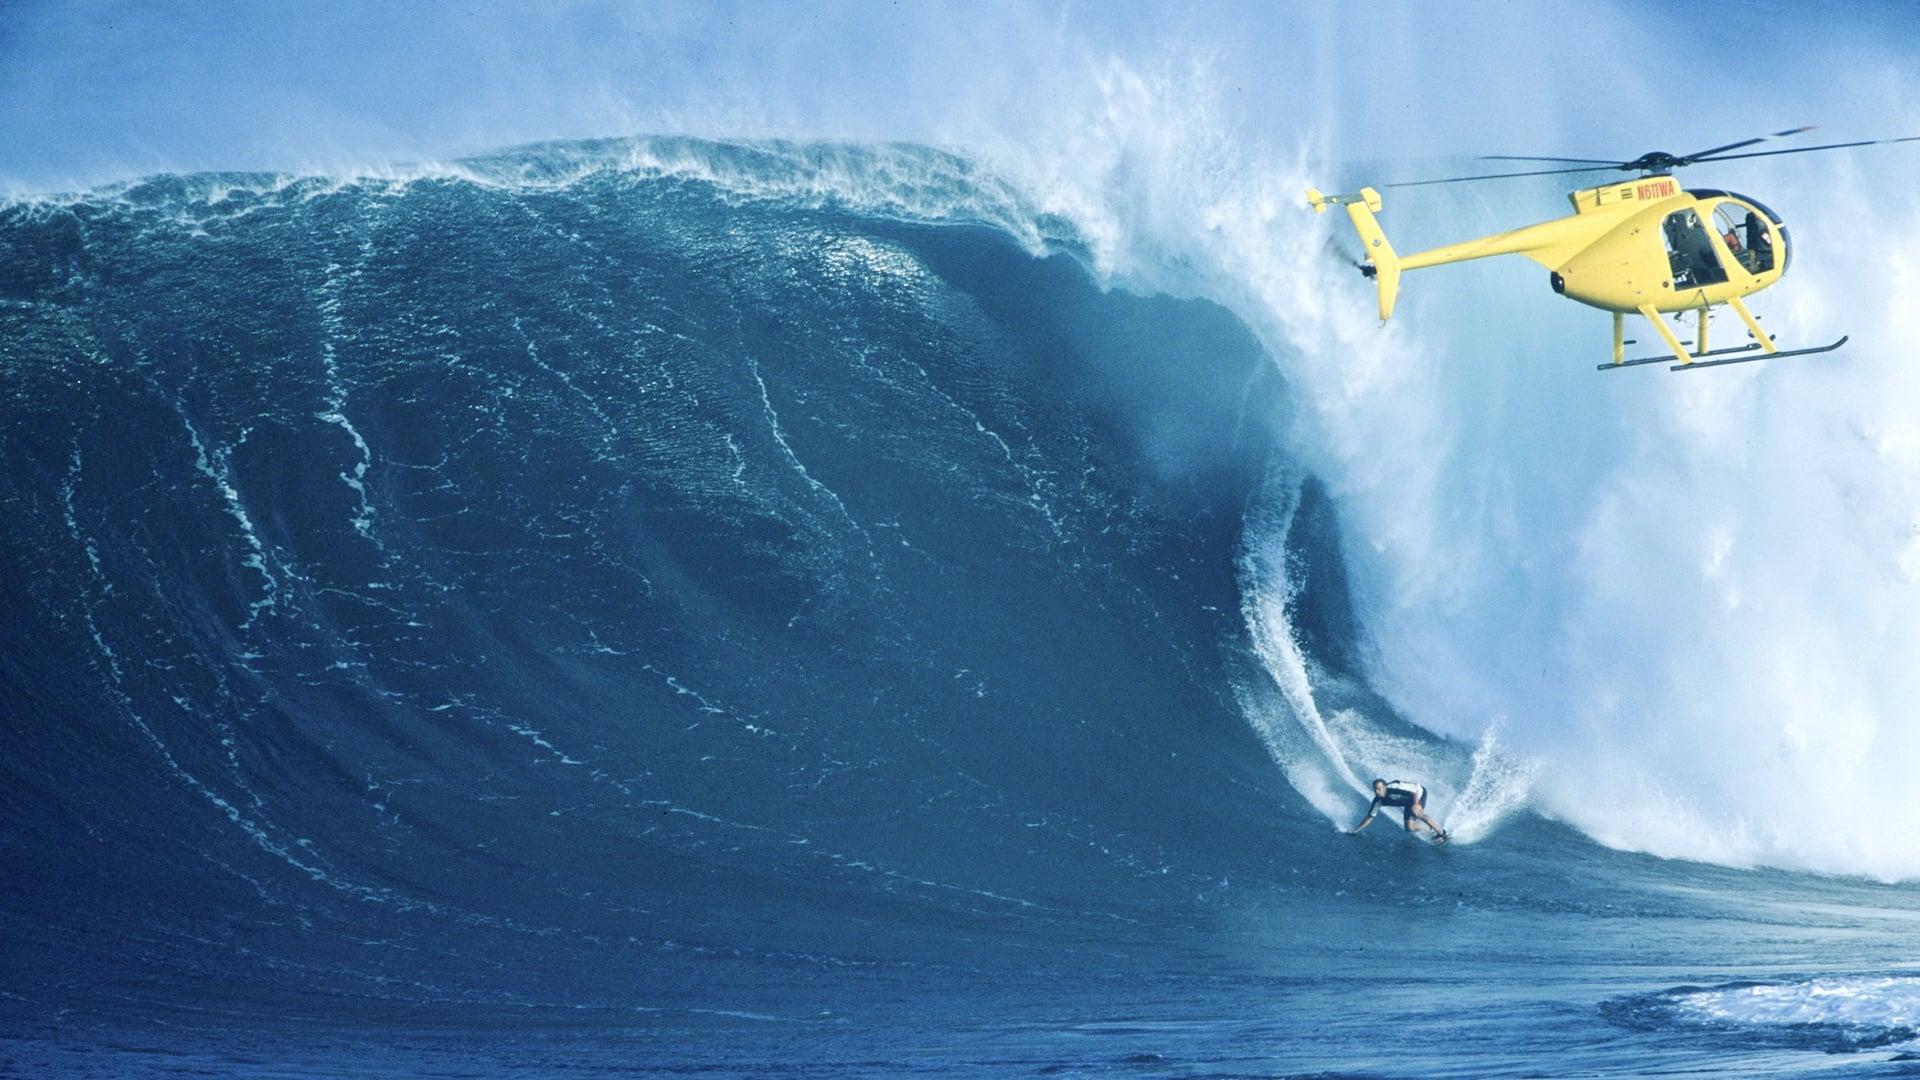 Take Every Wave: The Life of Laird Hamilton backdrop